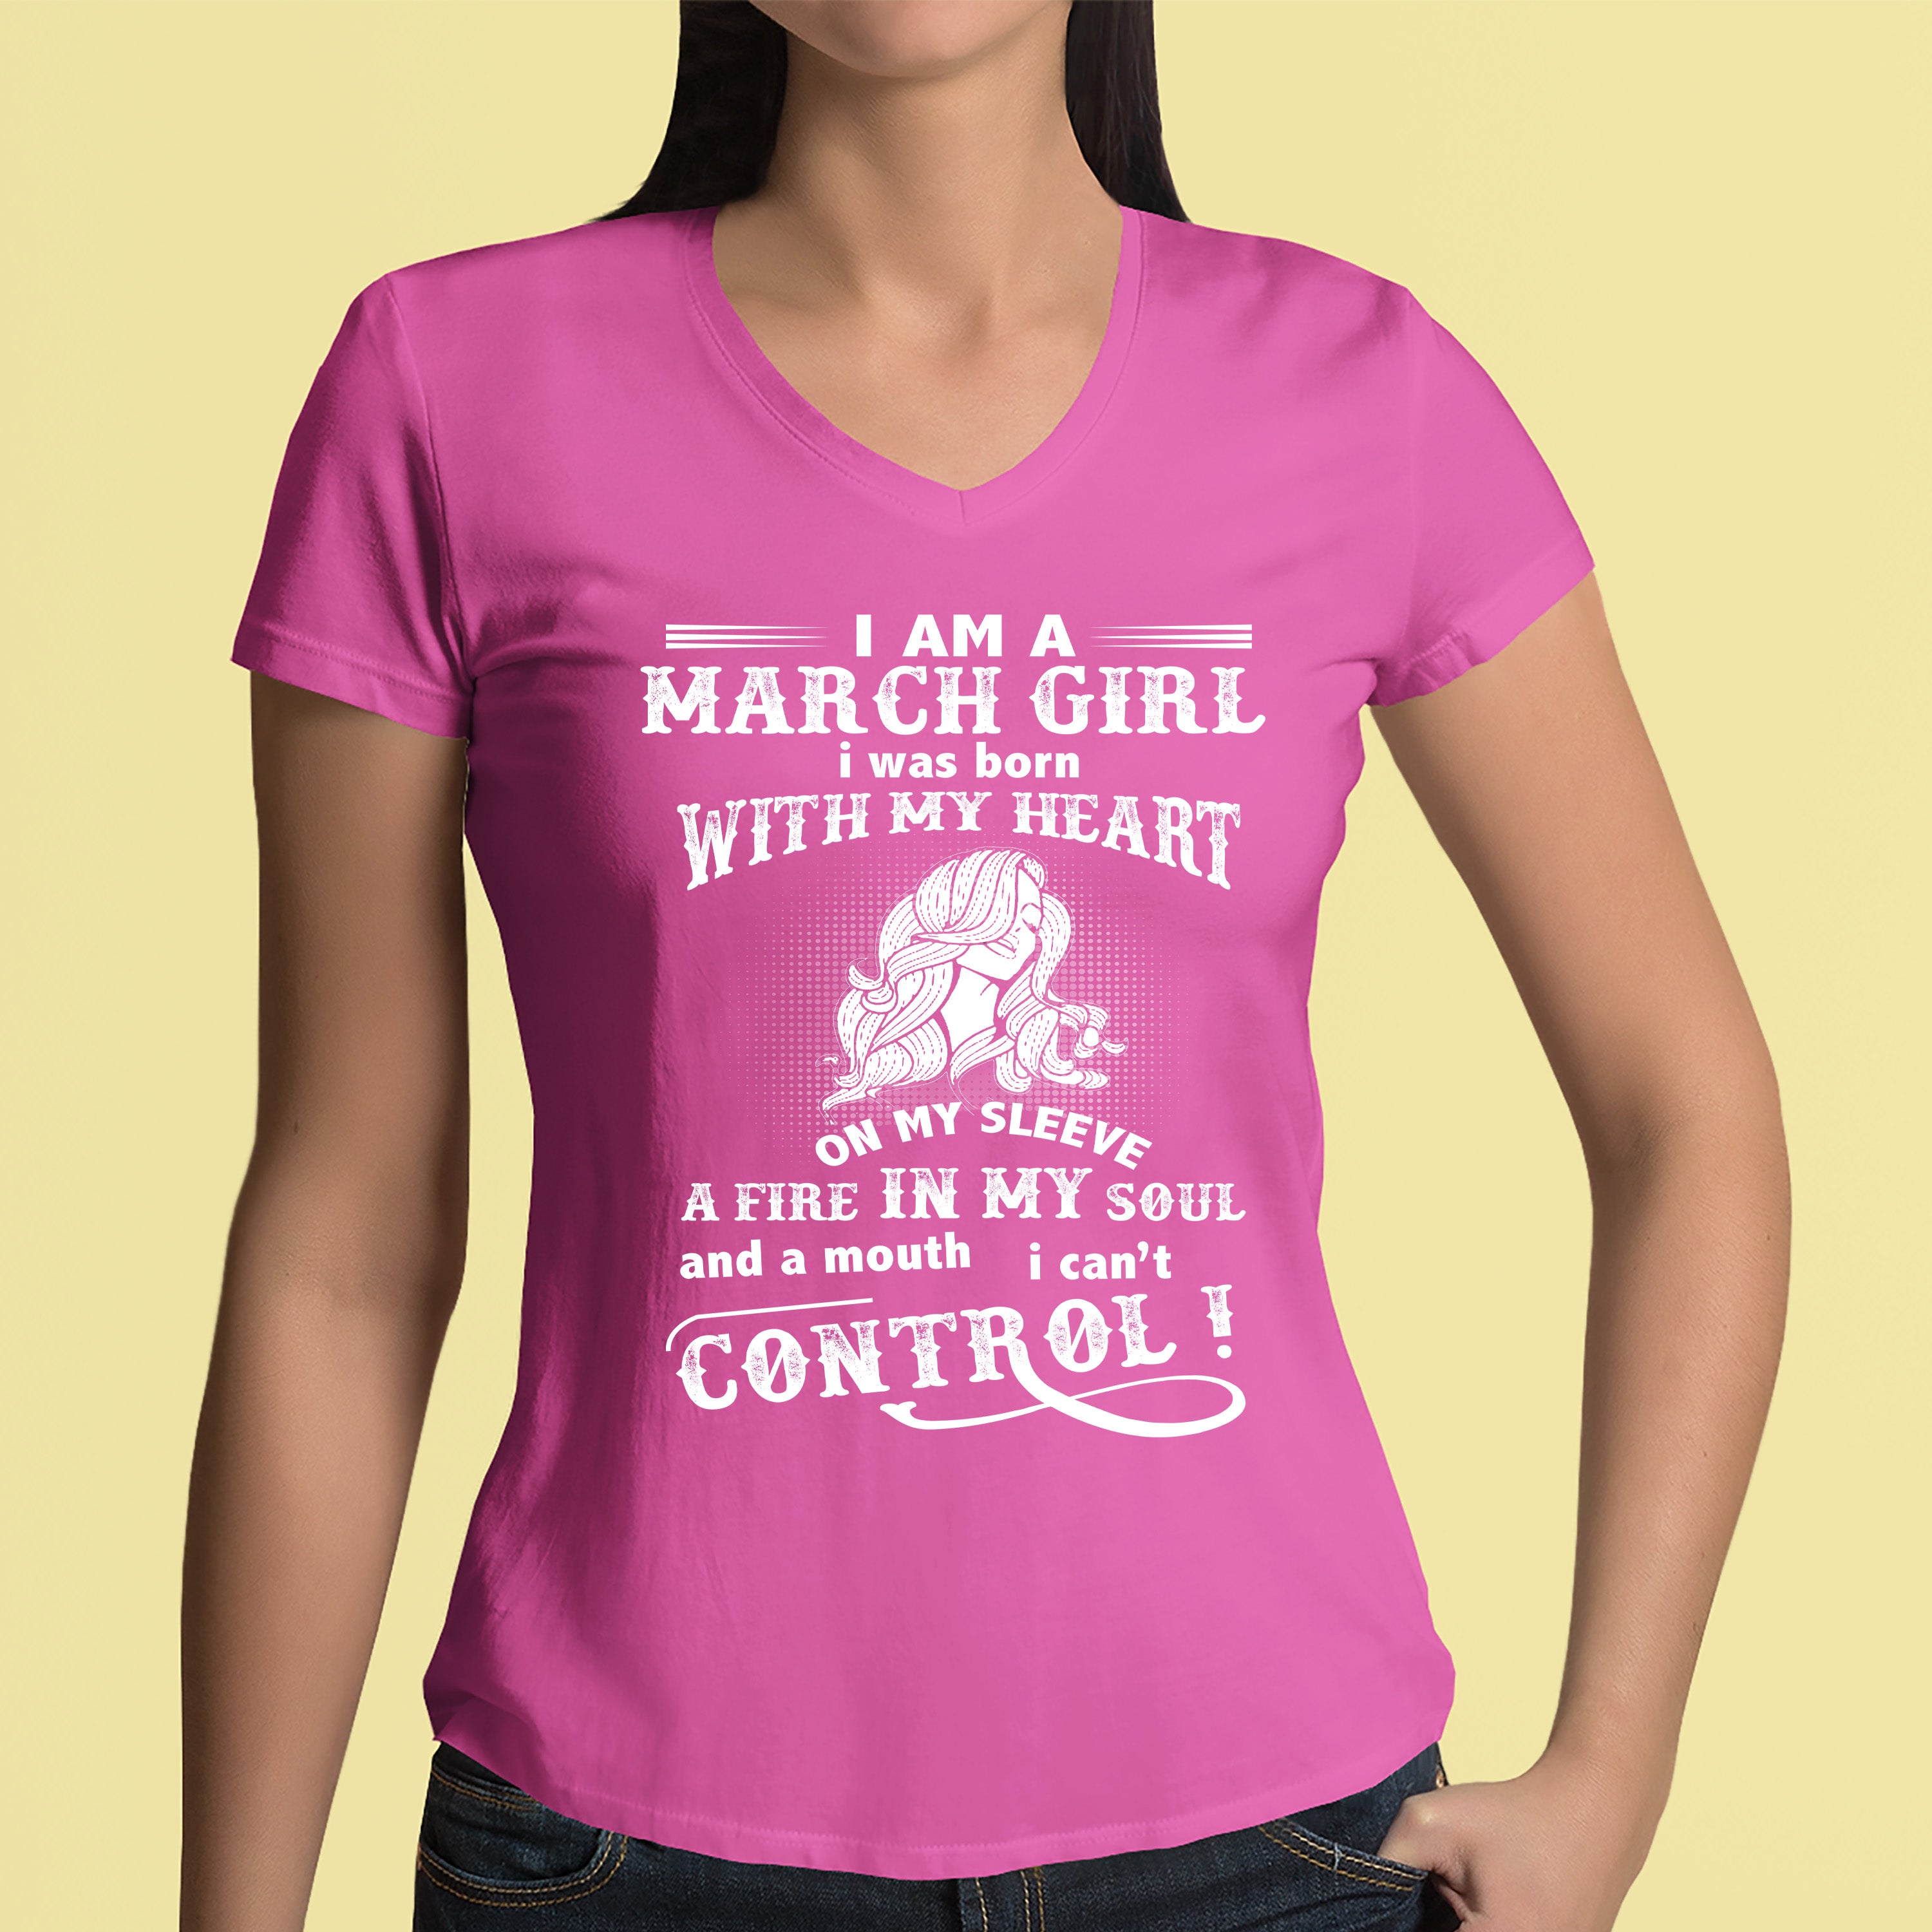 "A Fire In My Soul And A Mouth I Can't Control March Girl" -Pink